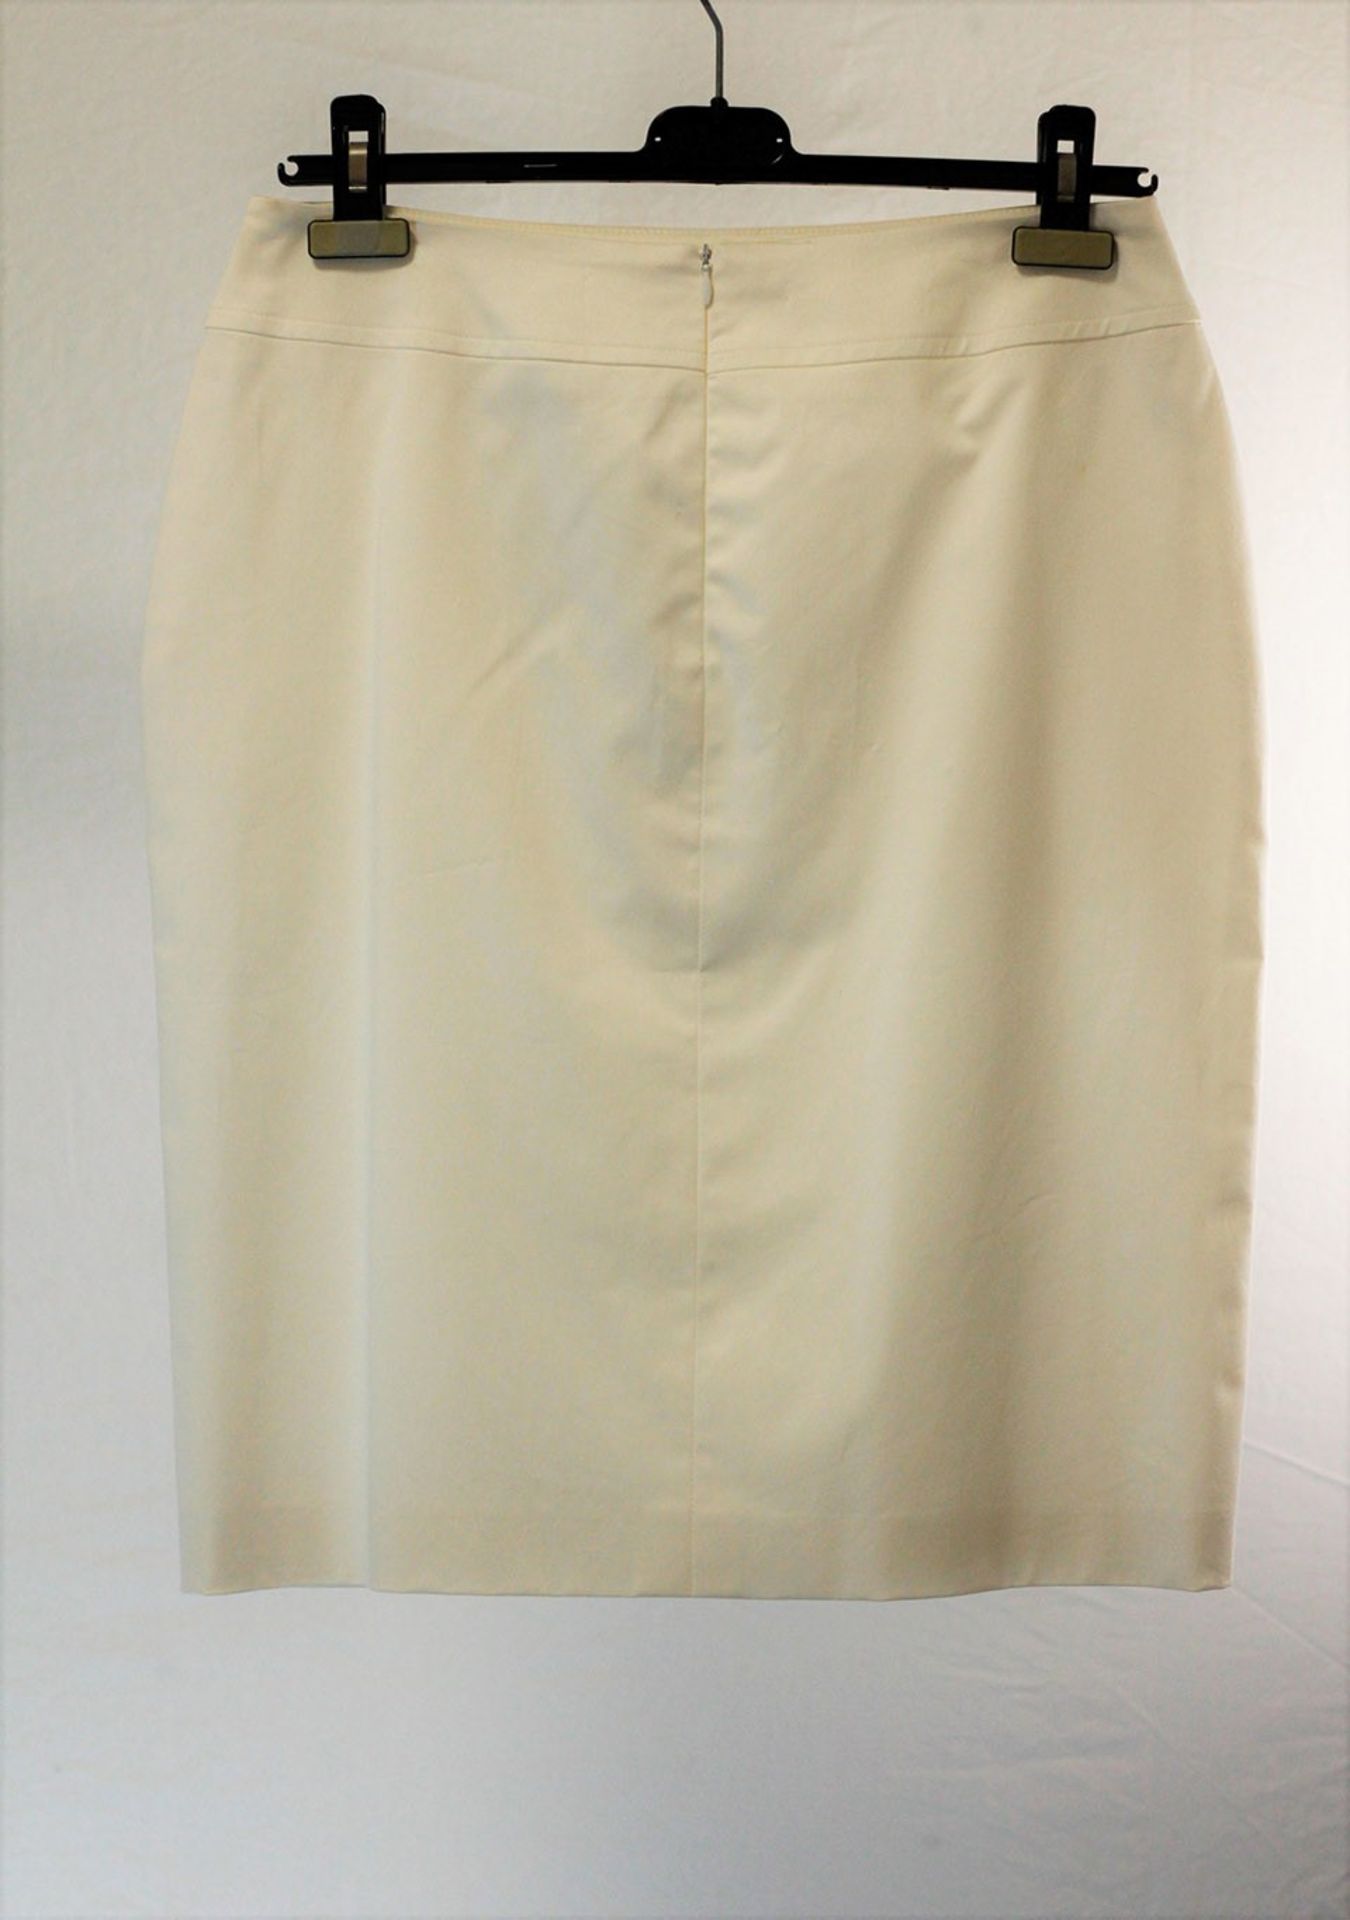 1 x Anne Belin White Skirt - Size: 14 - Material: 100% Cotton - From a High End Clothing Boutique In - Image 5 of 9